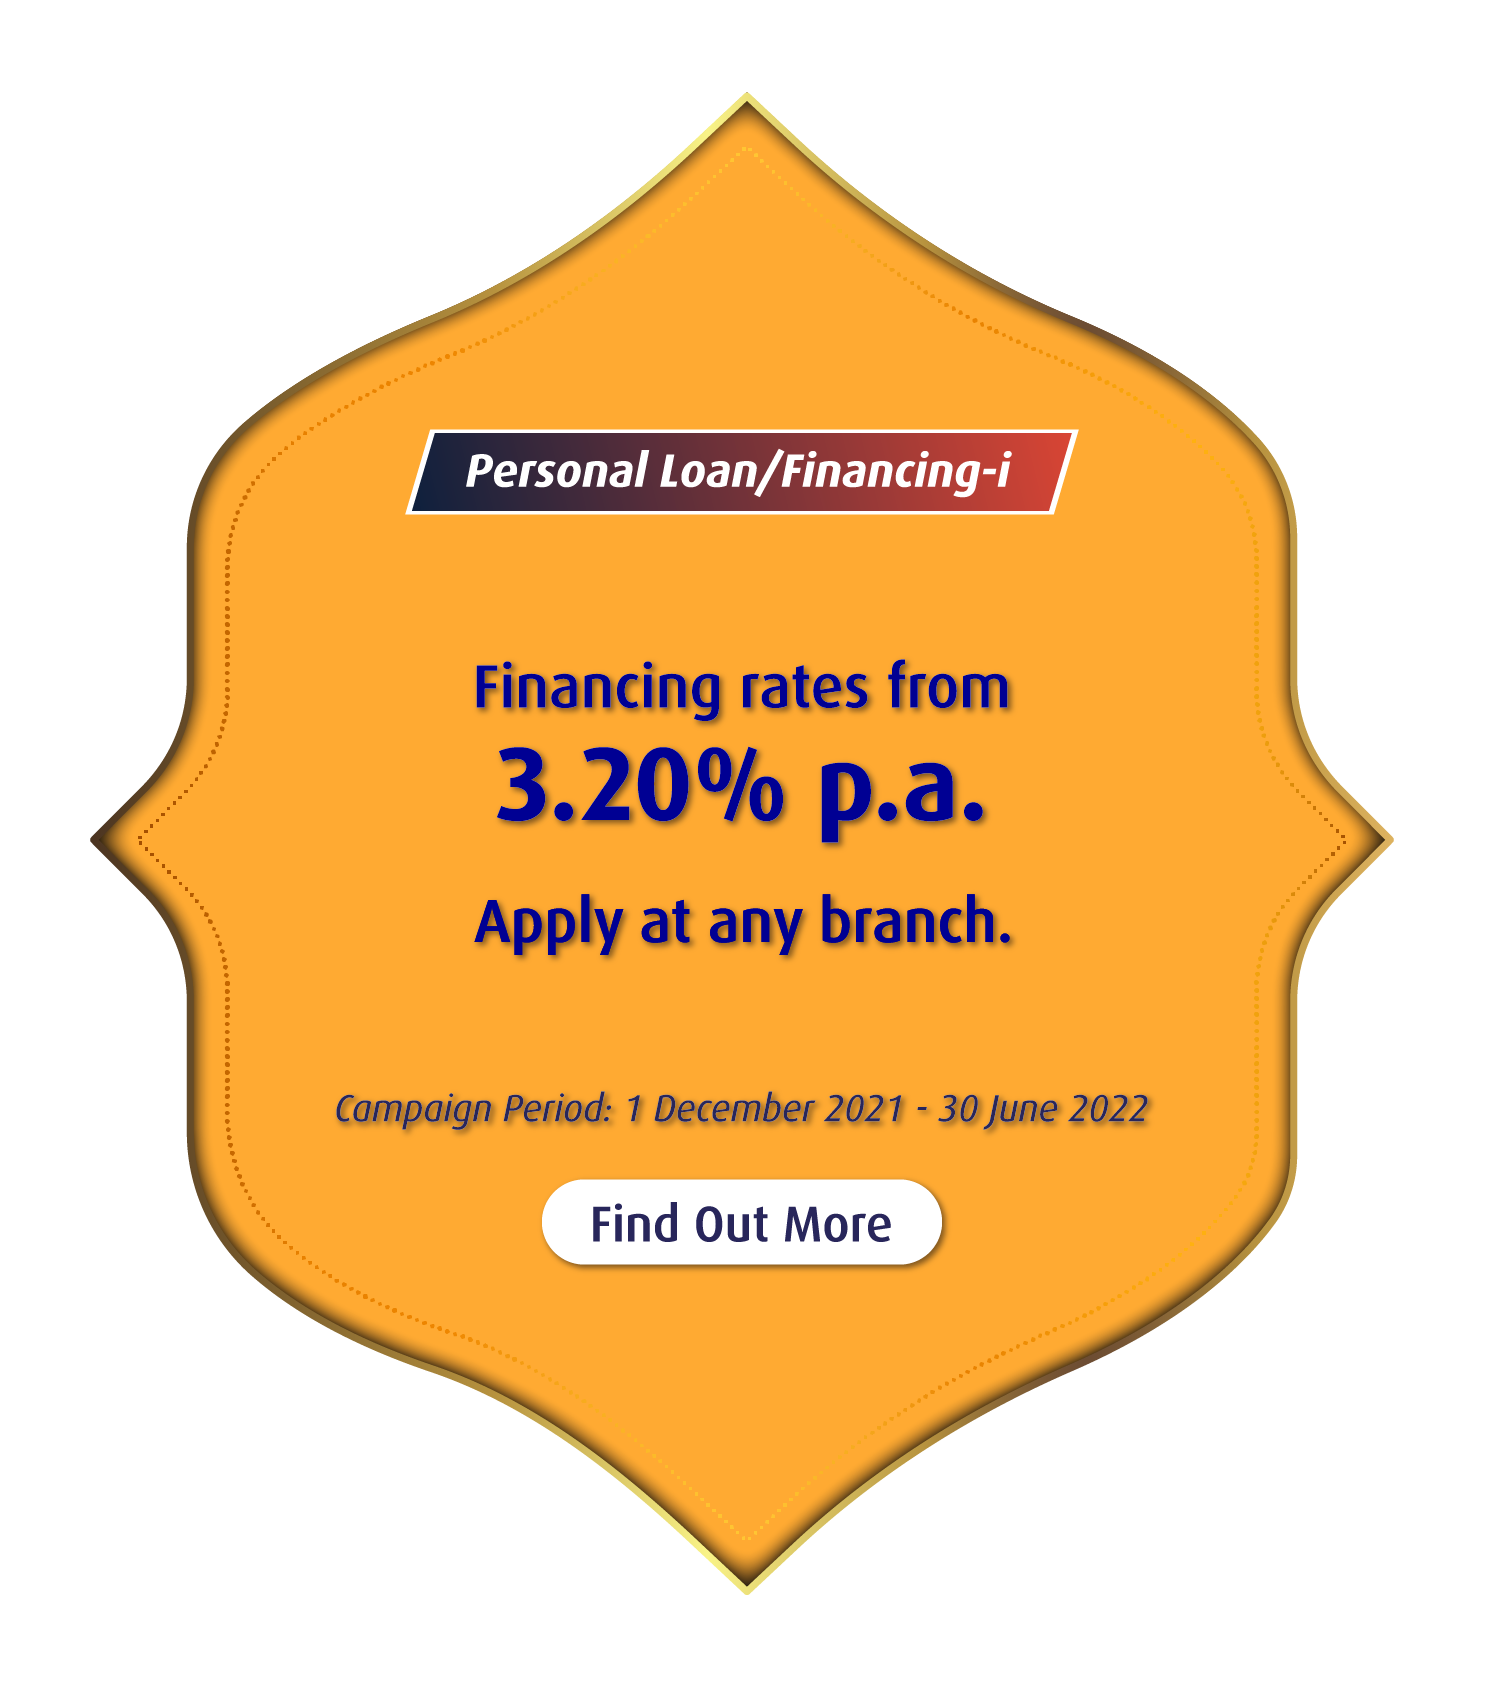 Financing rates from 3.20% p.a.